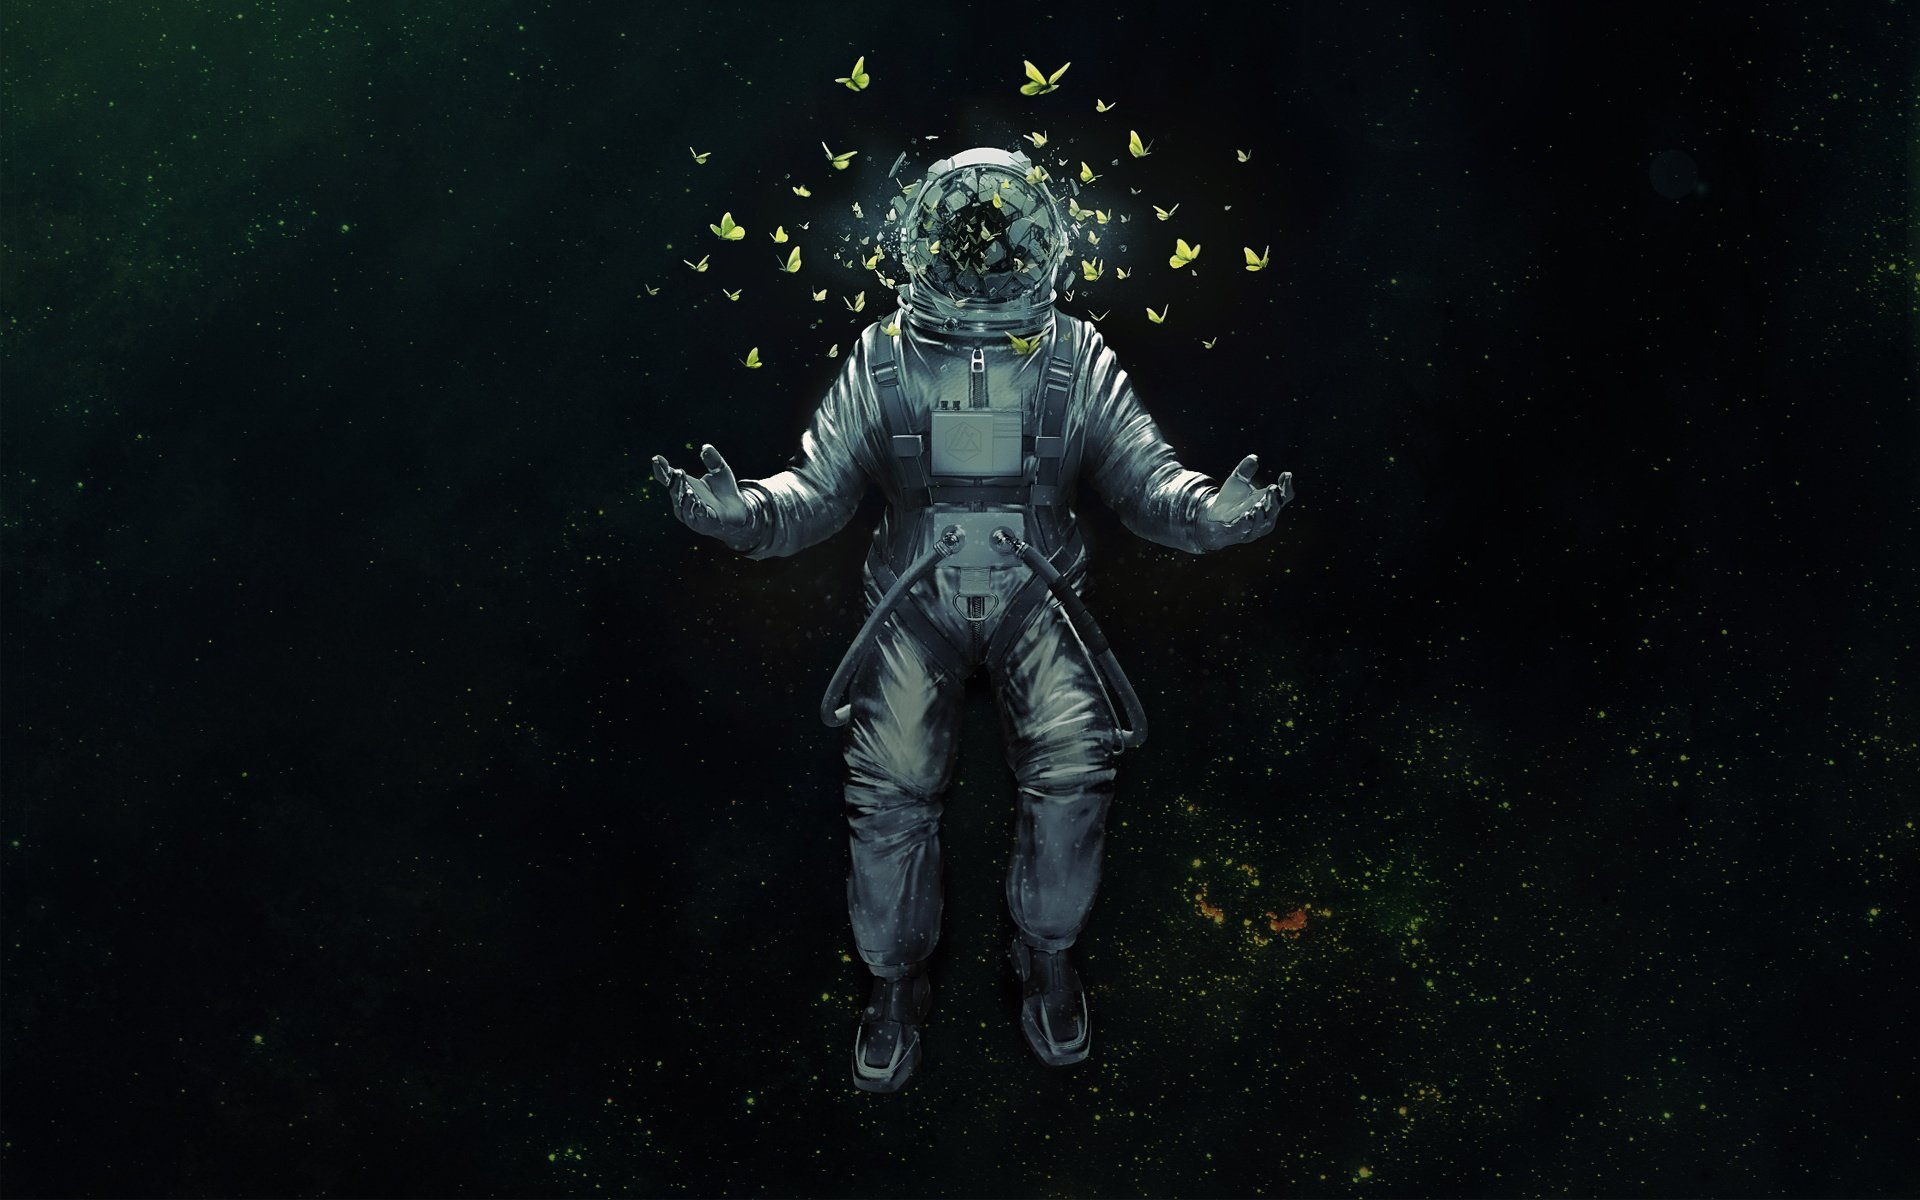 spacesuit, Astronaut, Space, Cosmos, Butterfly, Art Wallpaper